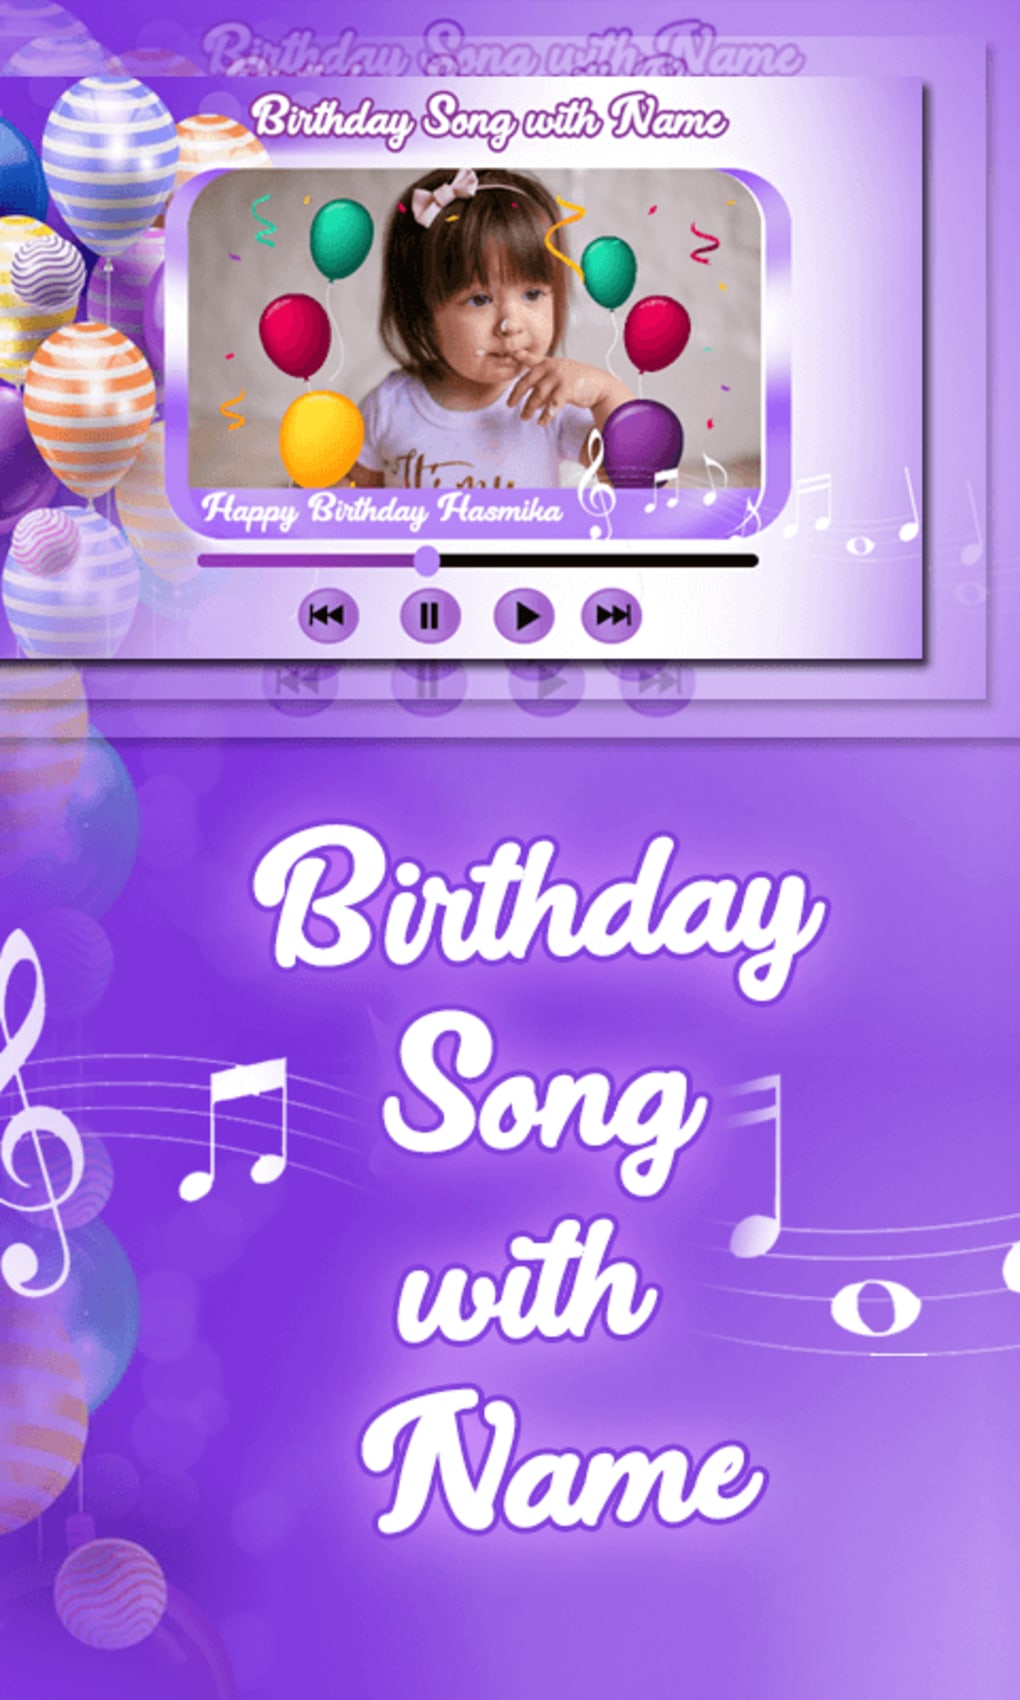 Happy Birthday Song With Name Buying Cheapest | www.micoope.com.gt